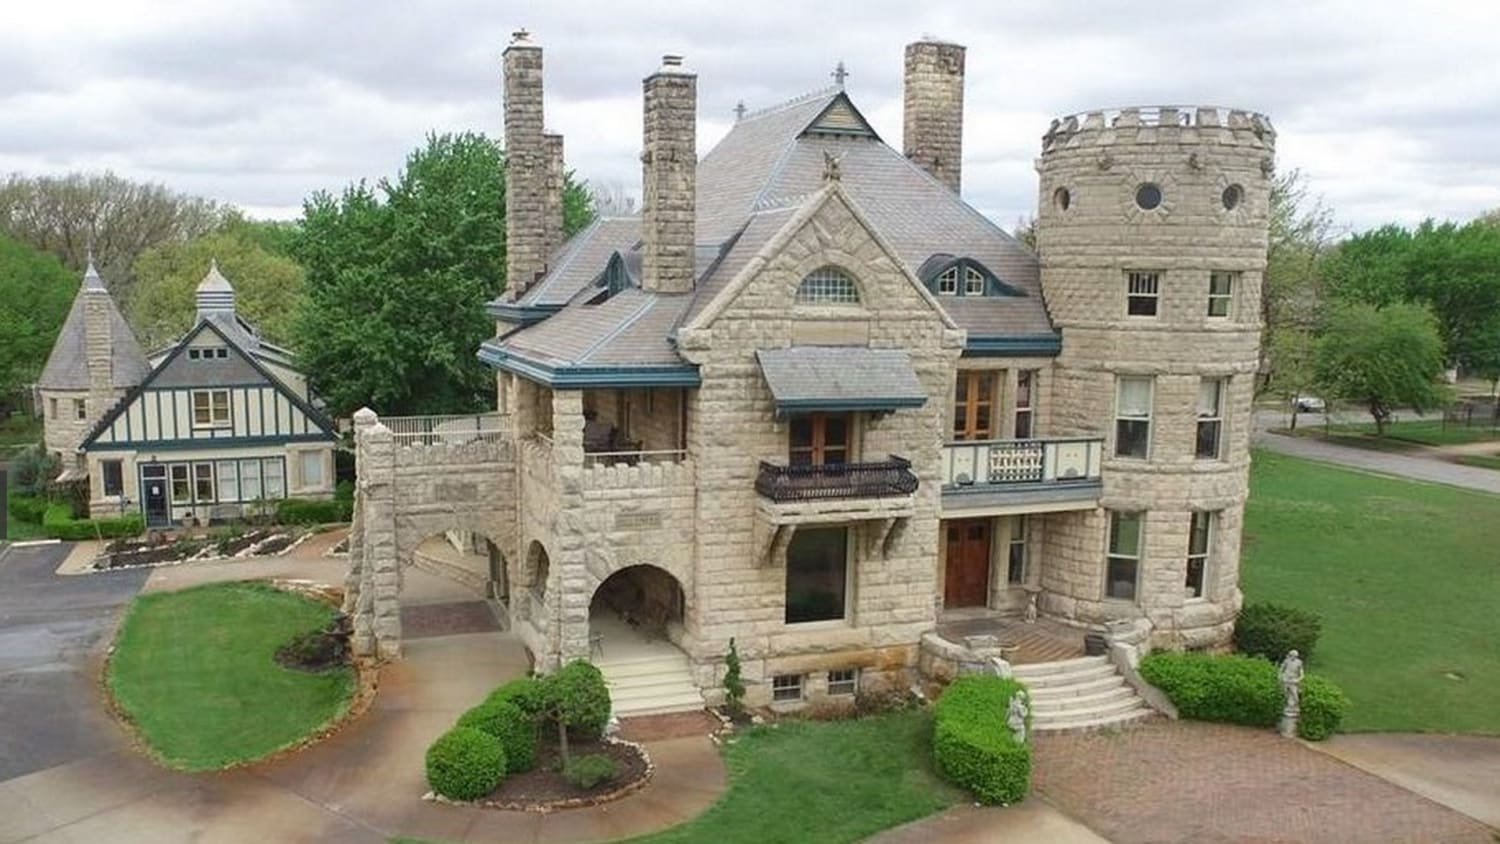 Forget McMansions or tiny homes: 5 U.S. castles for sale - TODAY.com